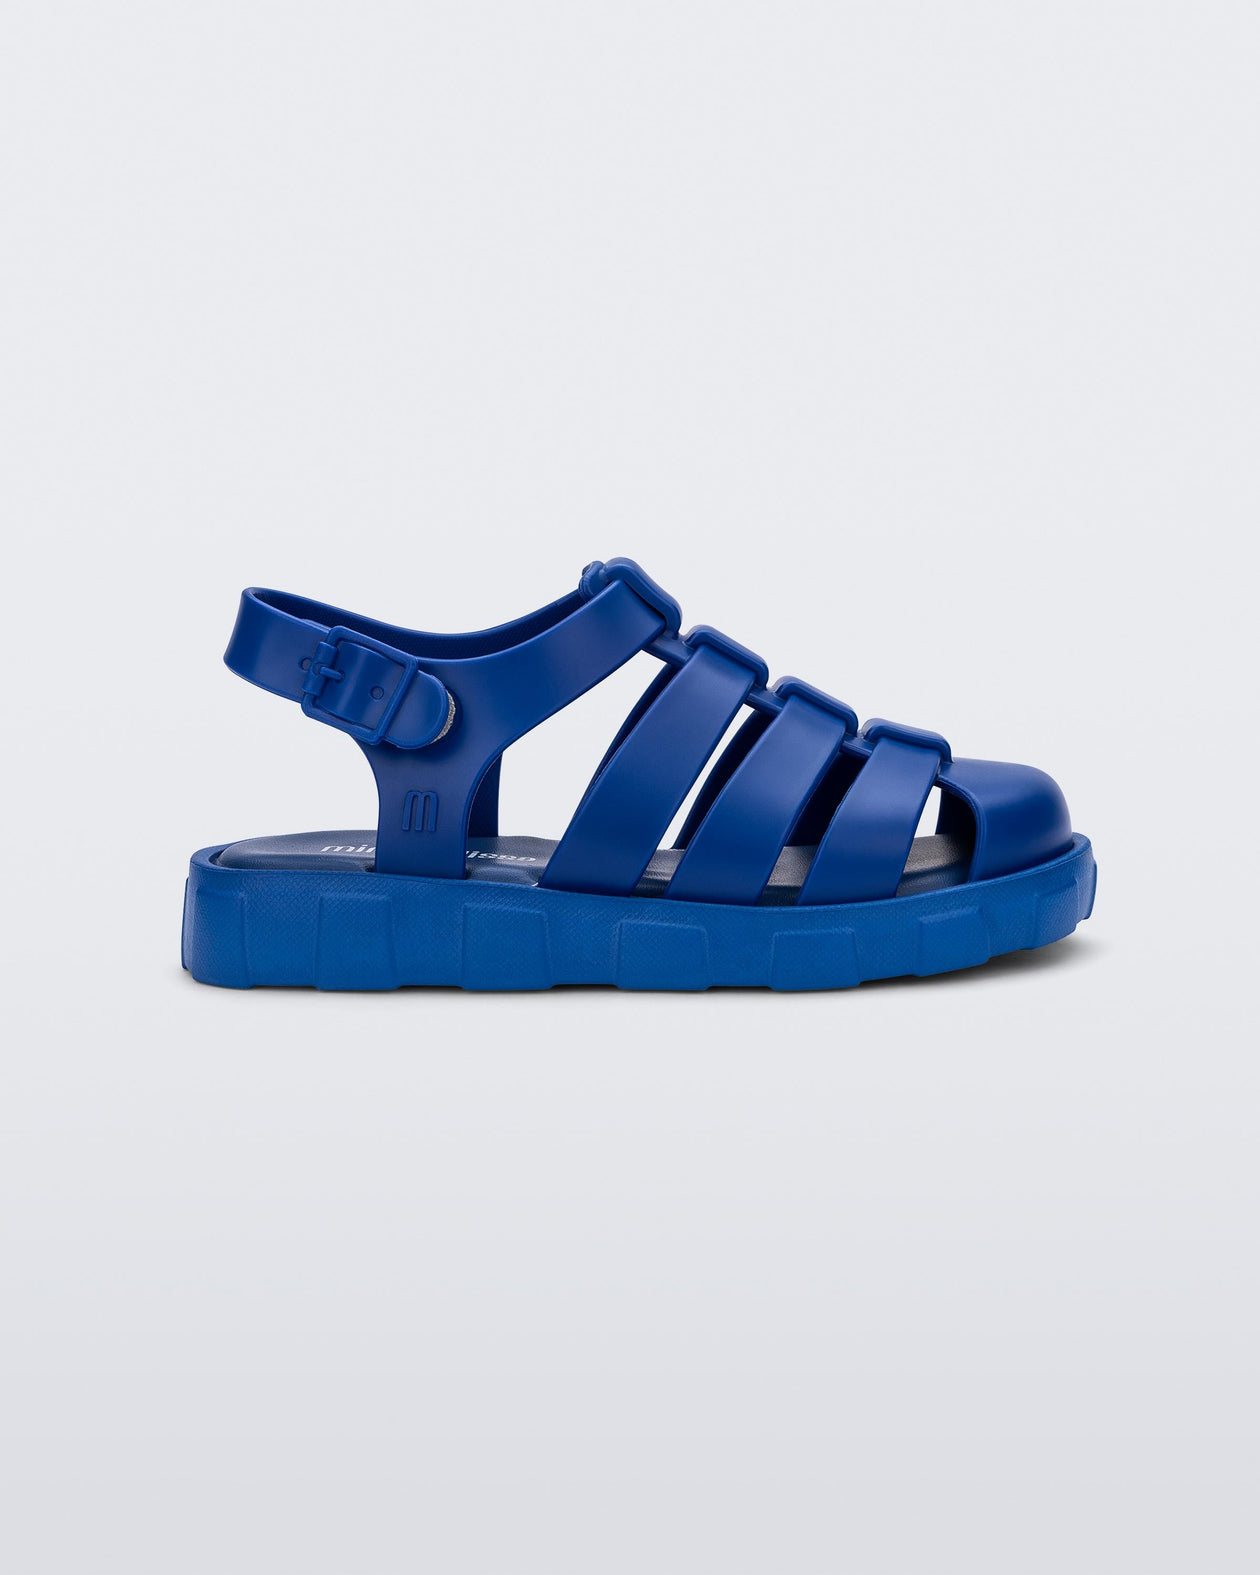 Side view of a blue Megan baby sandal.